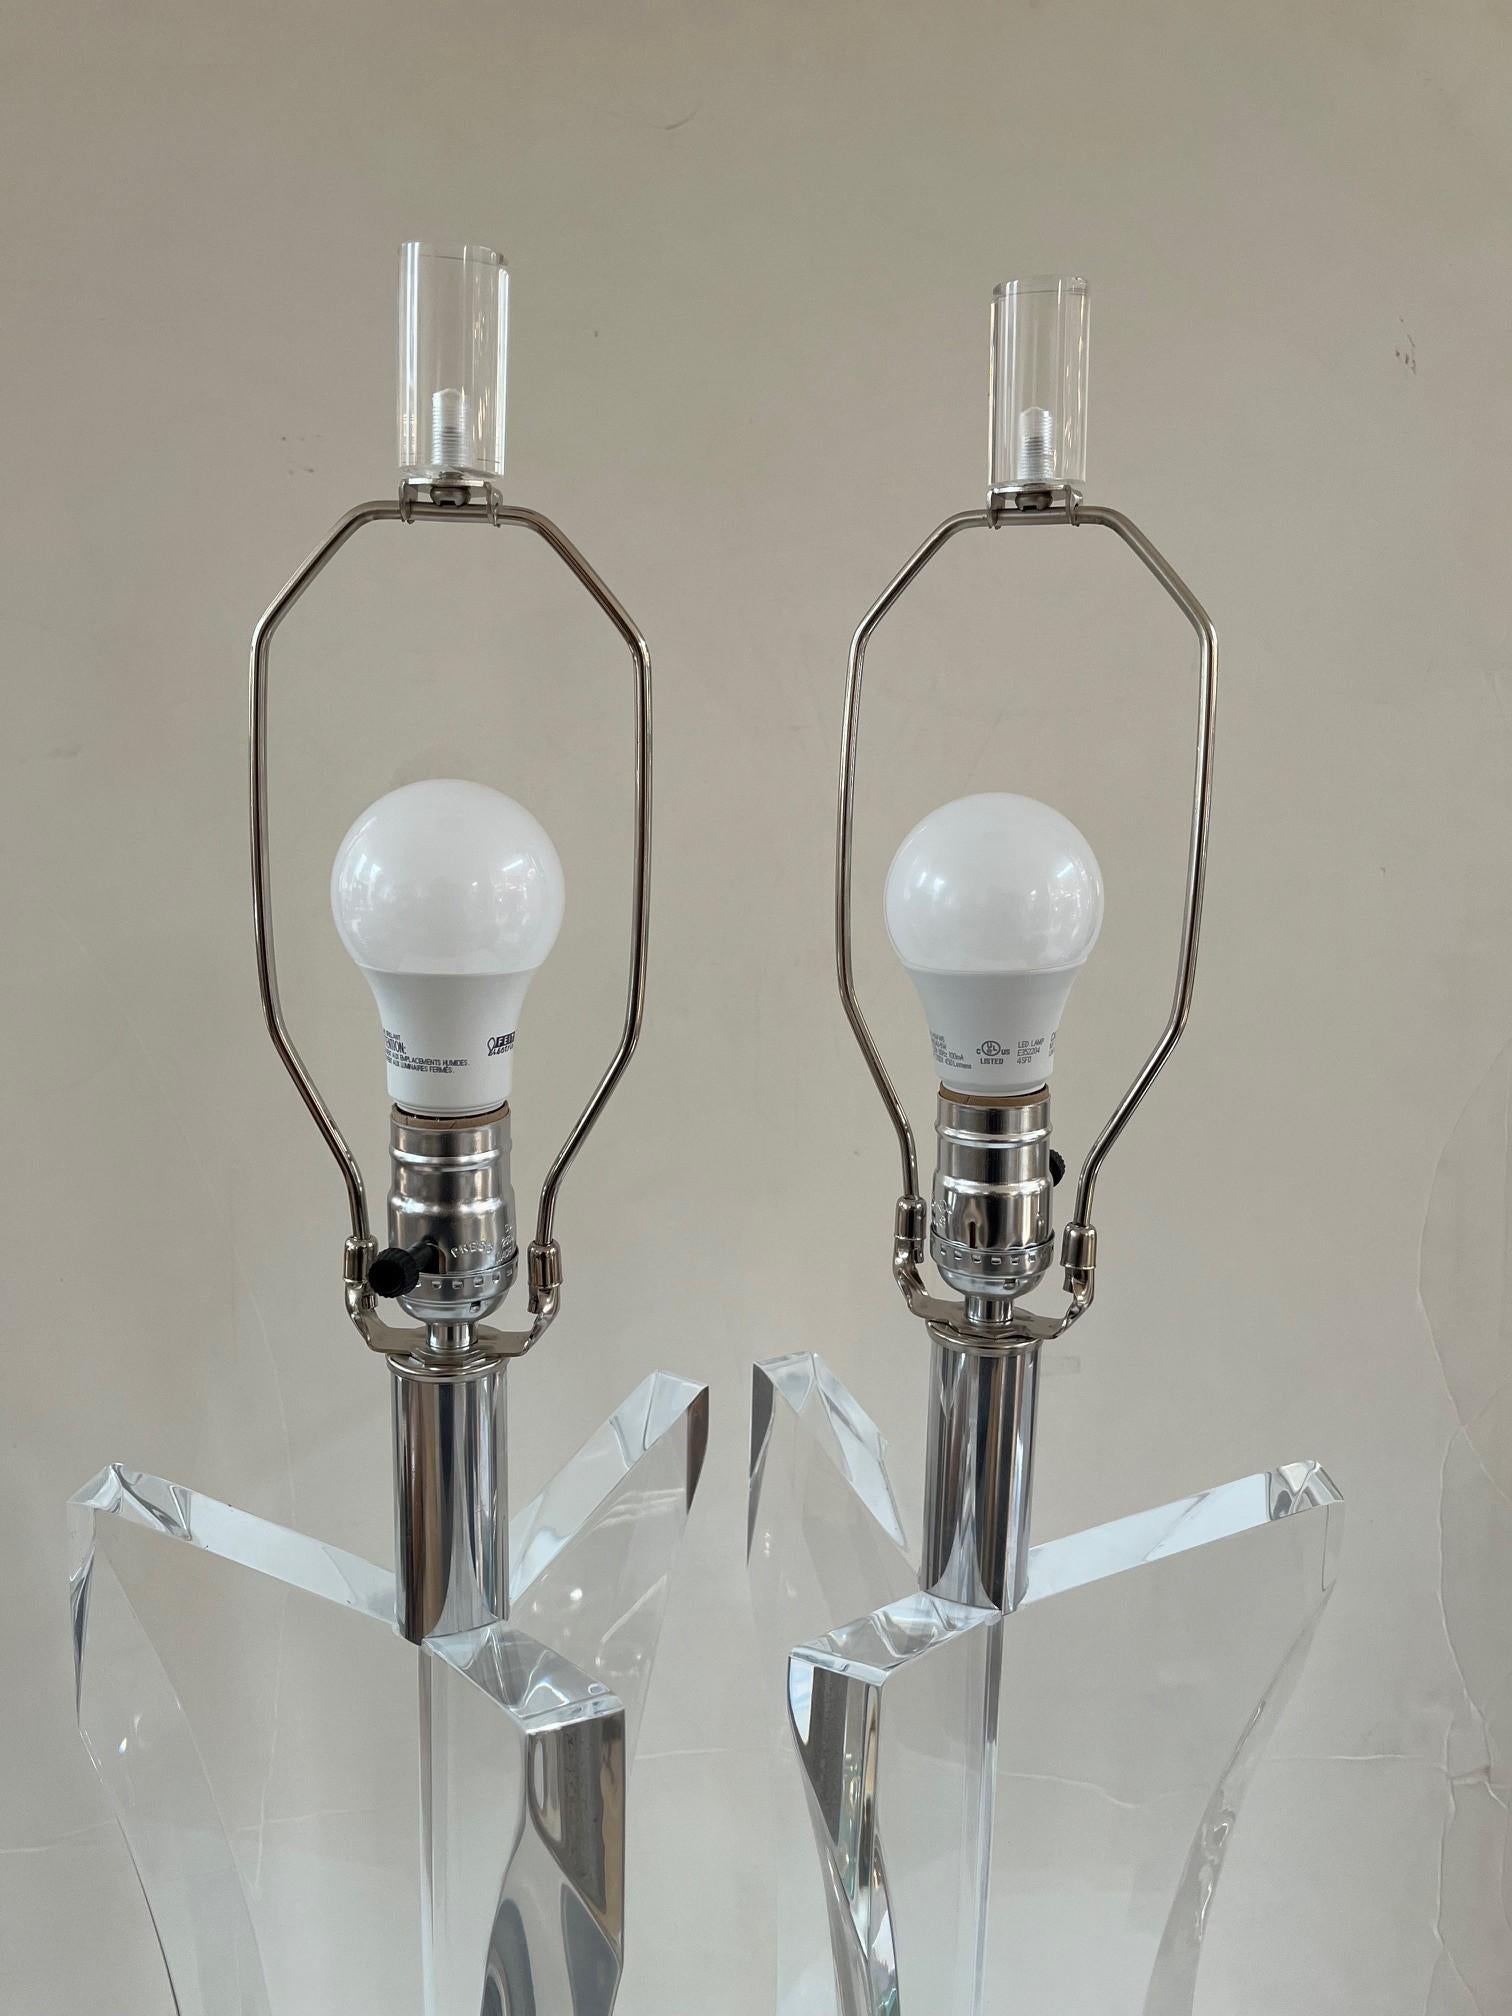 Pair of Vintage Ritts Astrolite Transparent Triform Fin Lucite Table Lamps, Clear Acrylic Finials, Standard Single Socket with Chrome Plated Neck, Dimensions: 31.5